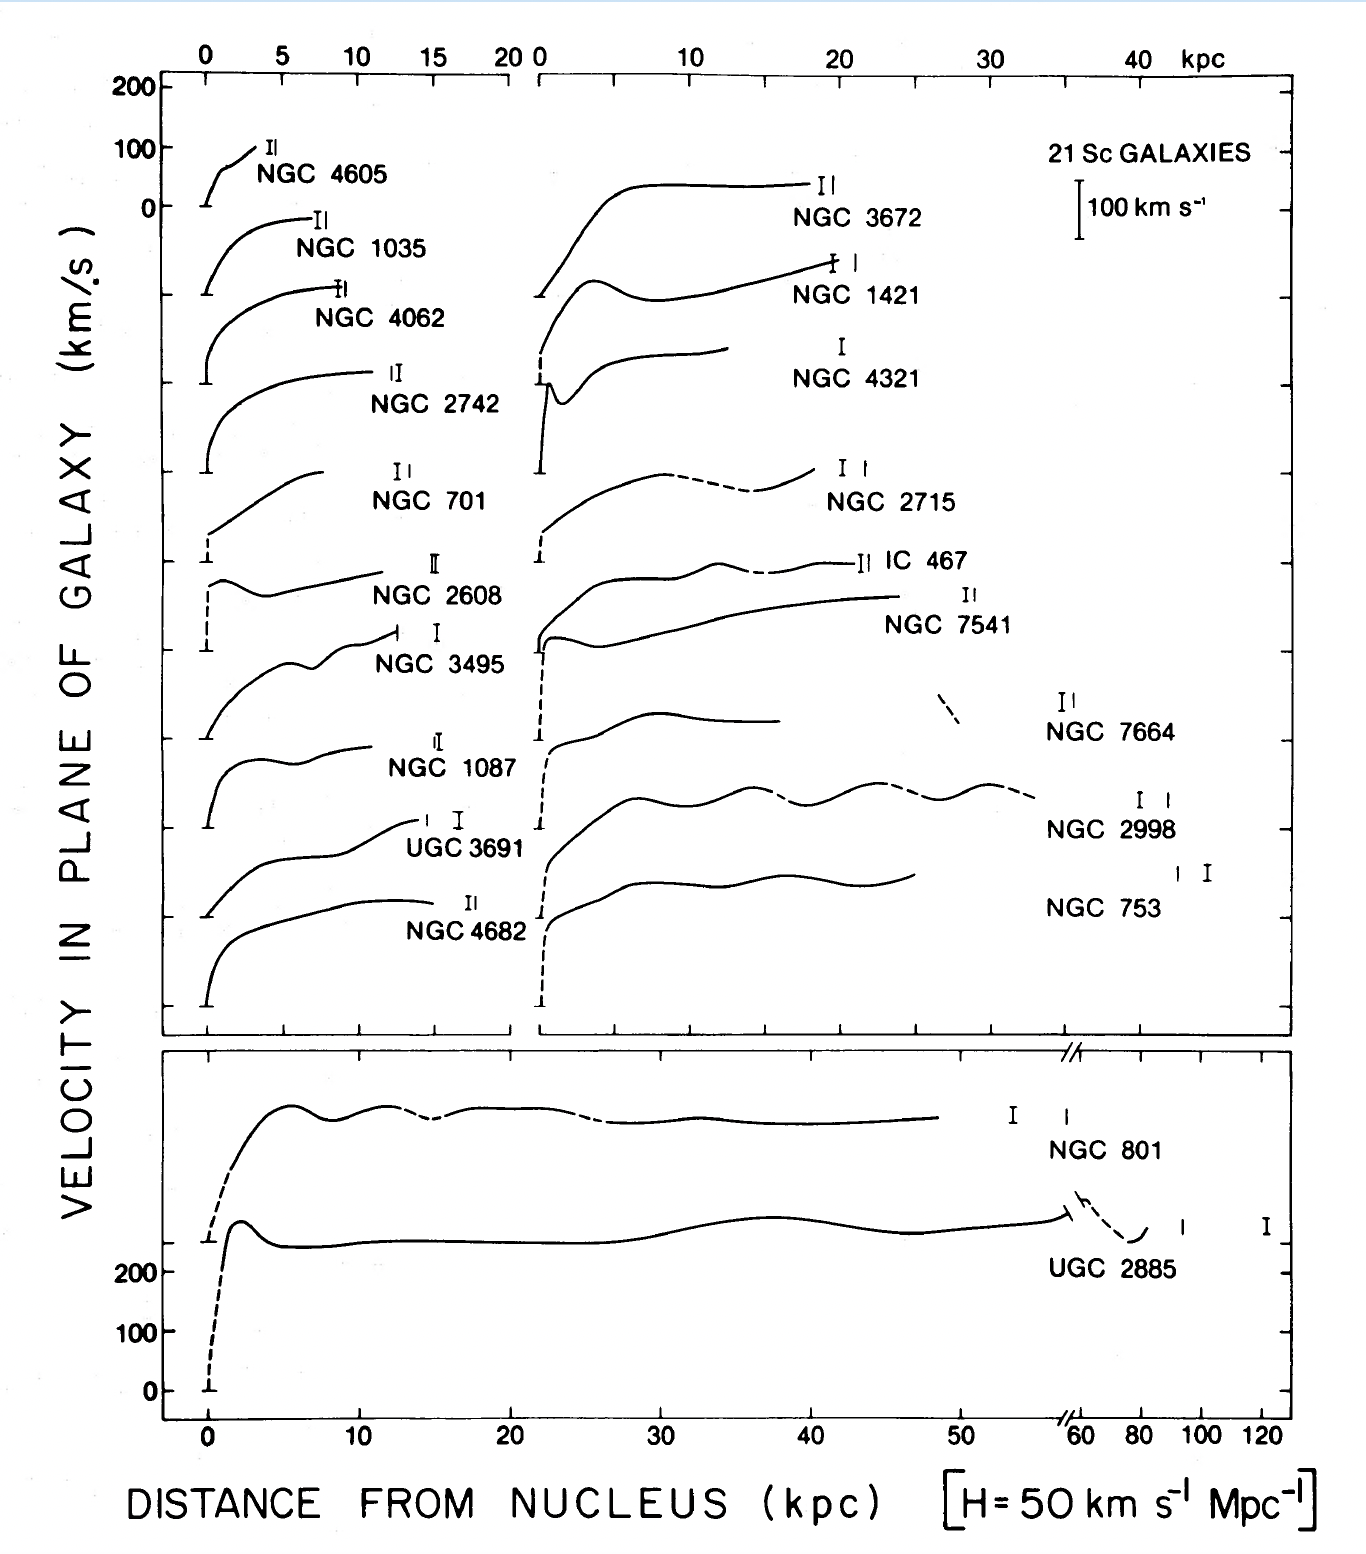 The mean velocity in the plane of 21 Sc galaxies as a function of linear velocity from the nucleus.